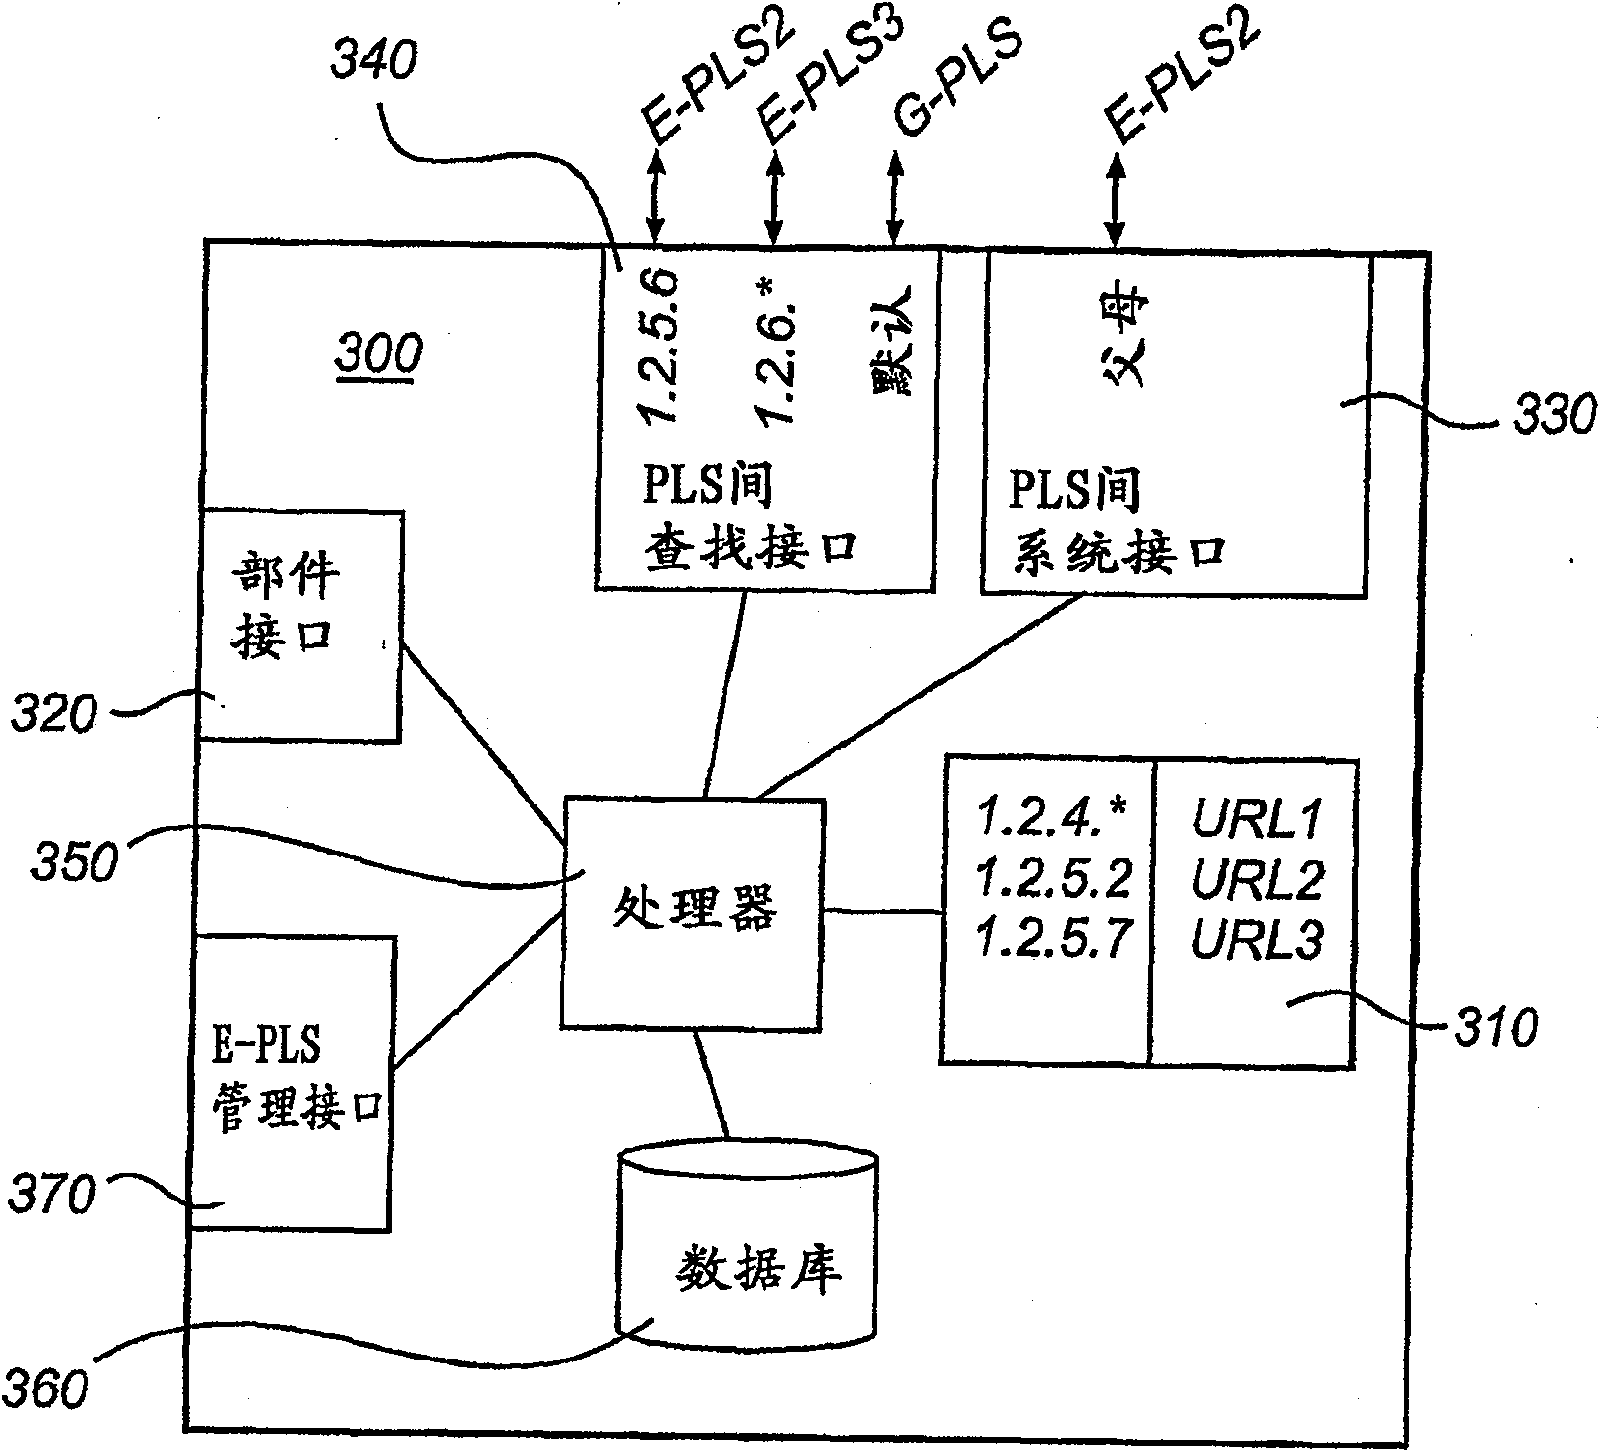 A method and a system for responding to a request for access to an application service